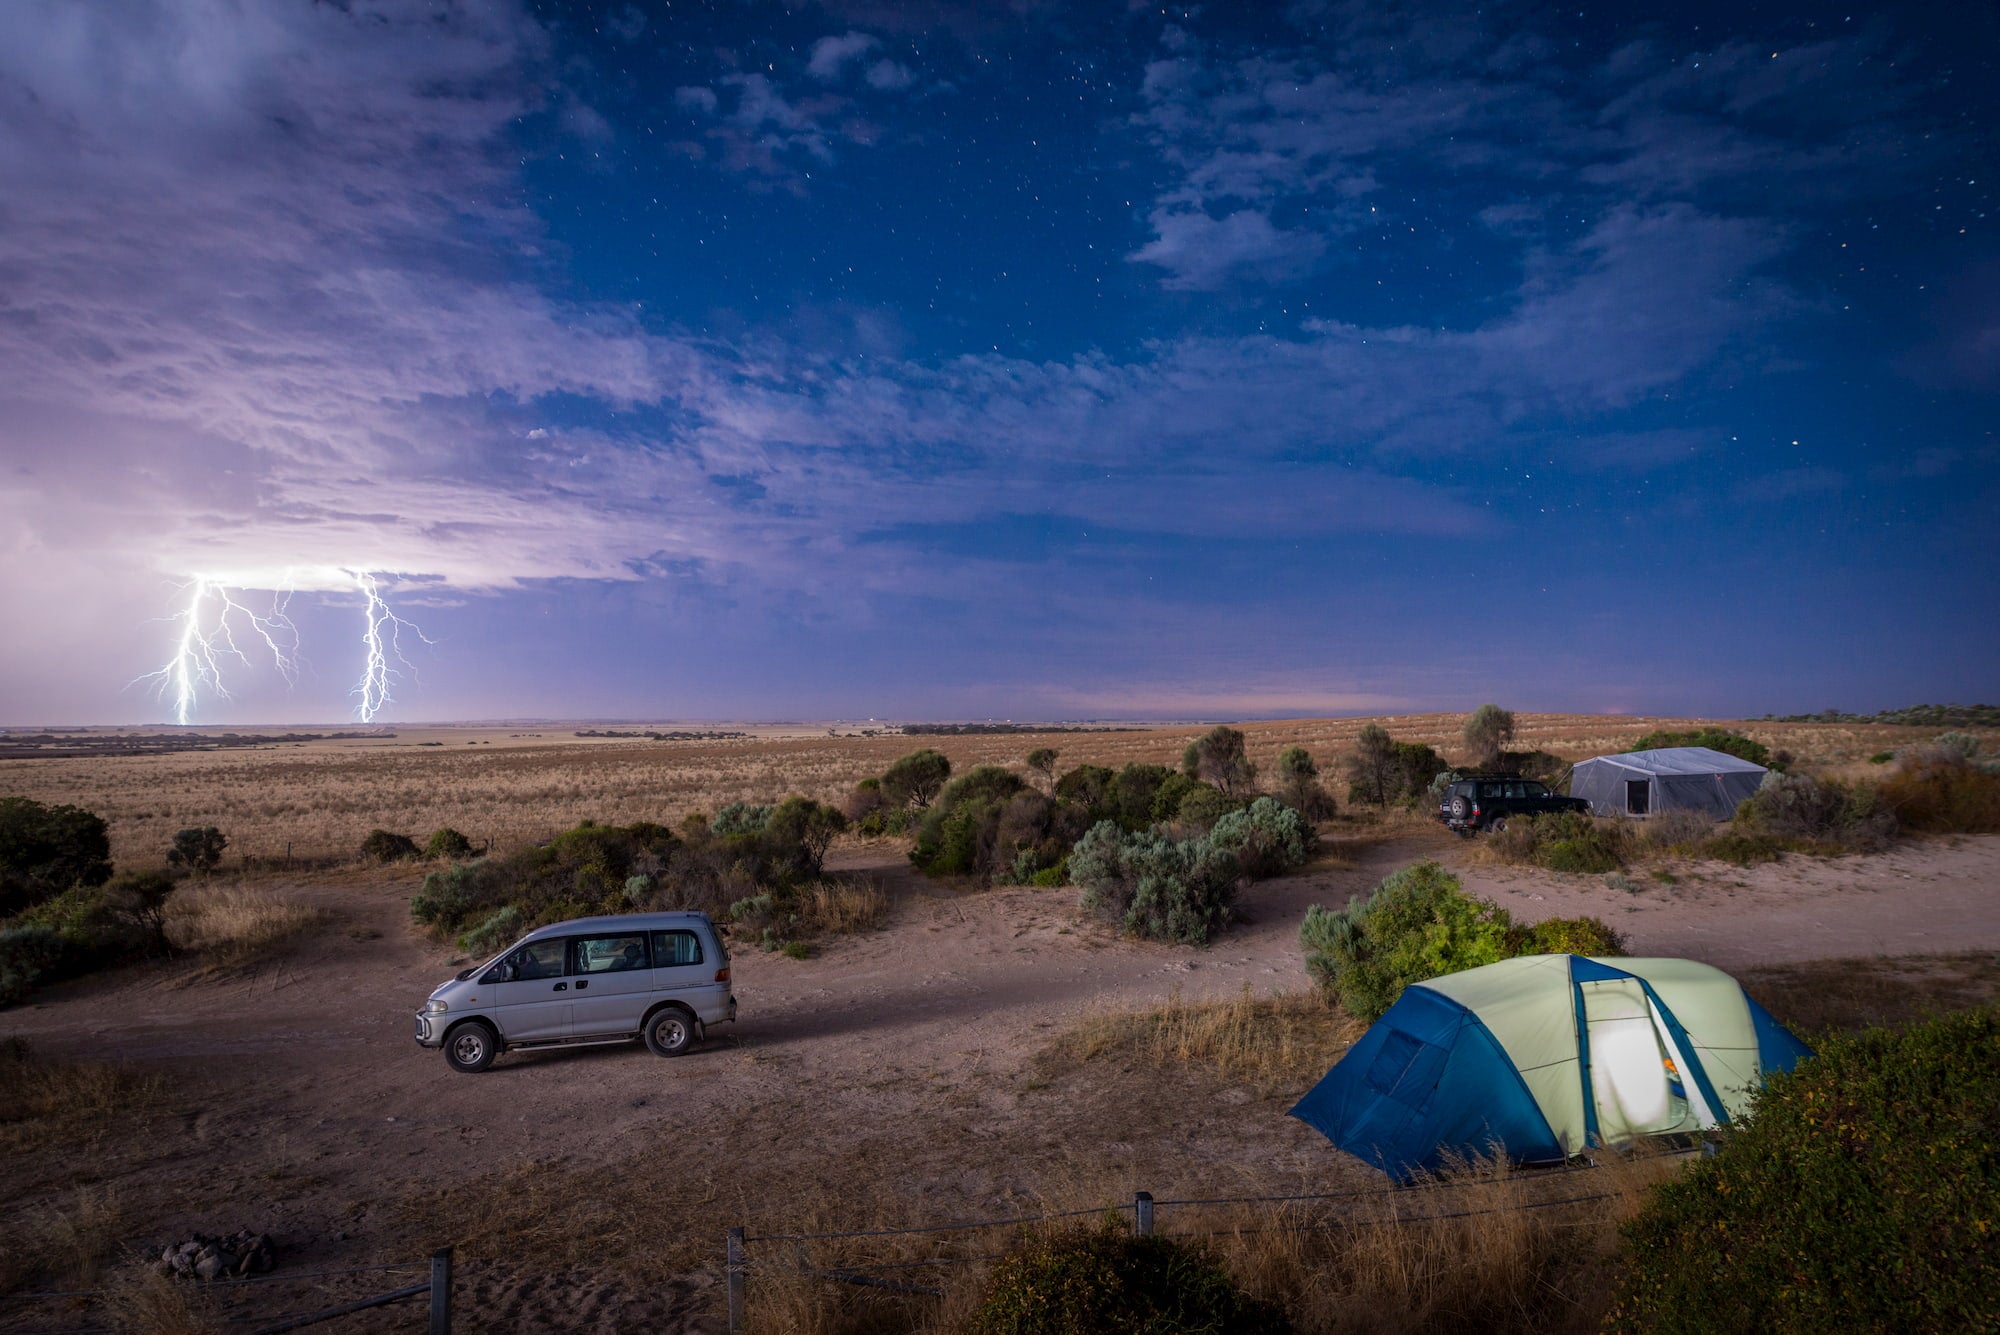 Lightning stirking in a prairie witha tent and van in the foreground.